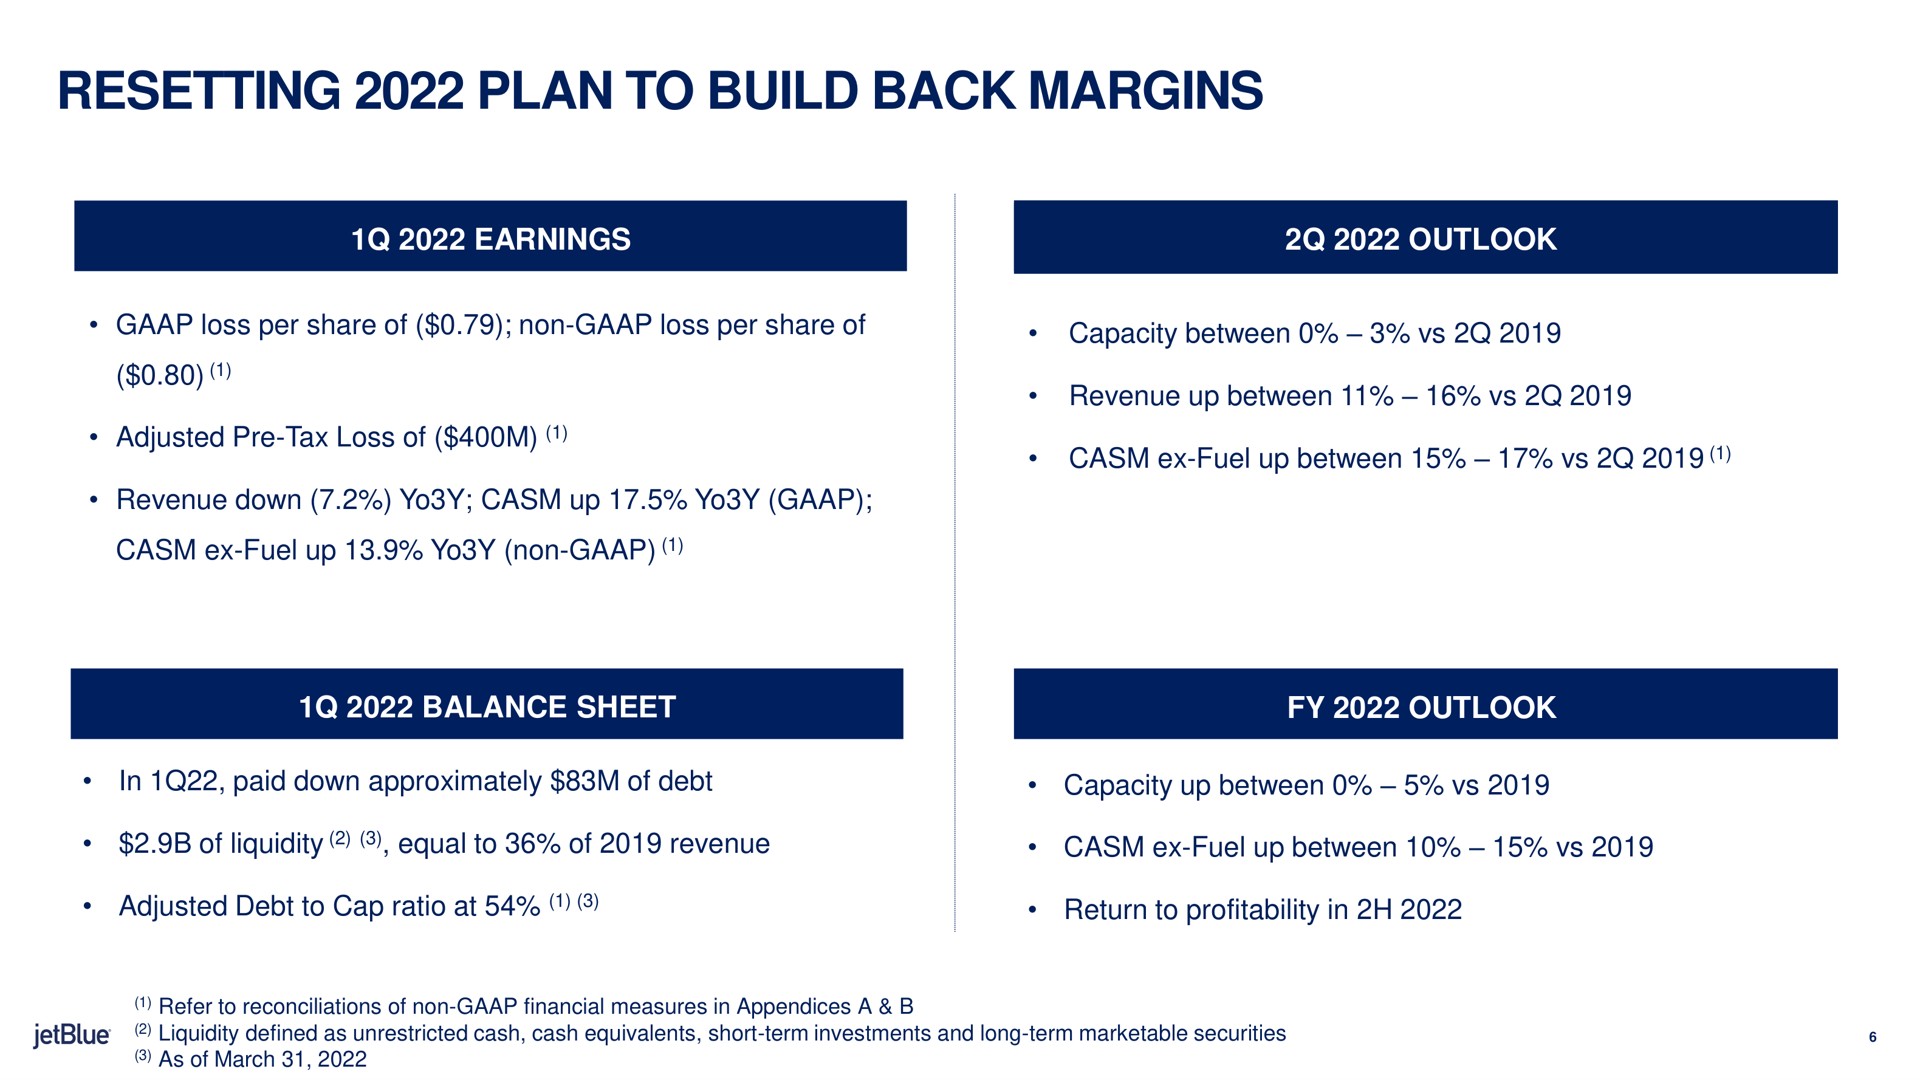 resetting plan to build back margins adjusted tax tax loss of revenue down up fuel up between | jetBlue